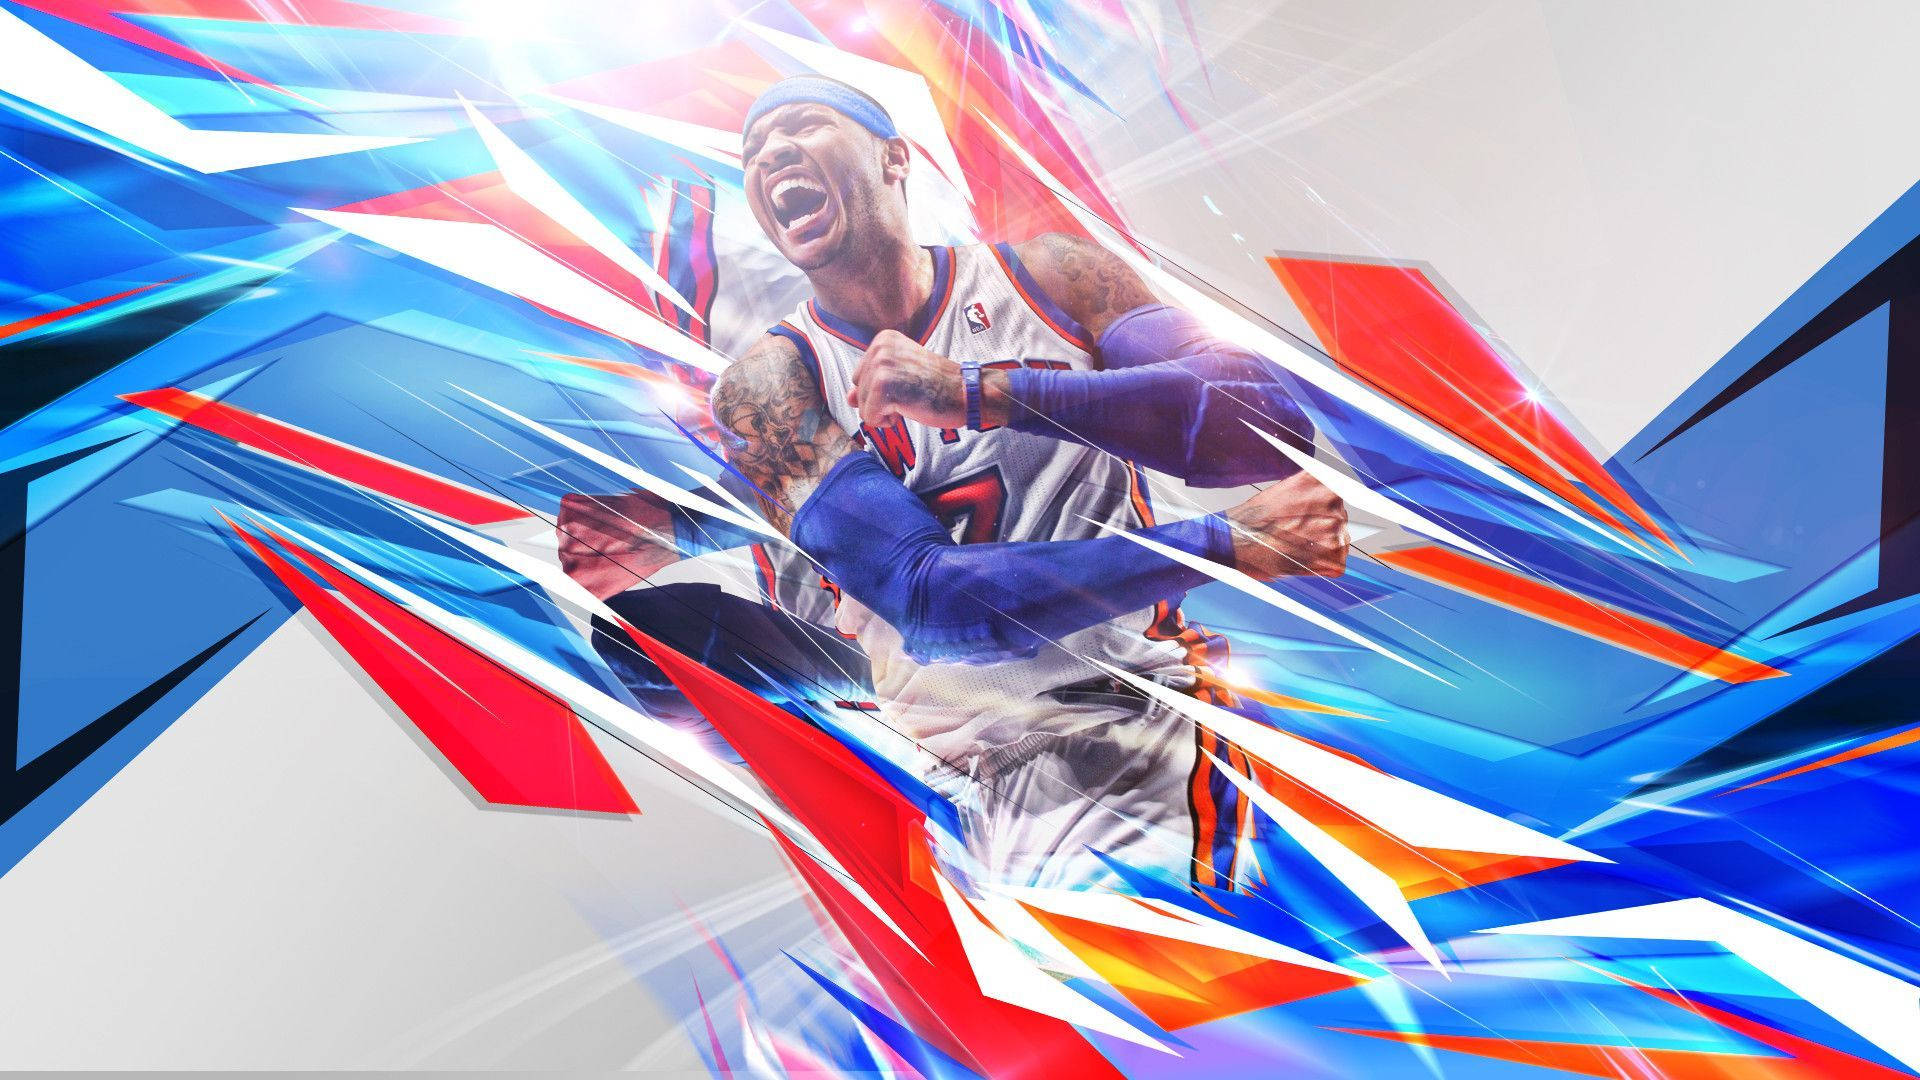 Cool Nba Player Carmelo Anthony Fan Art Background